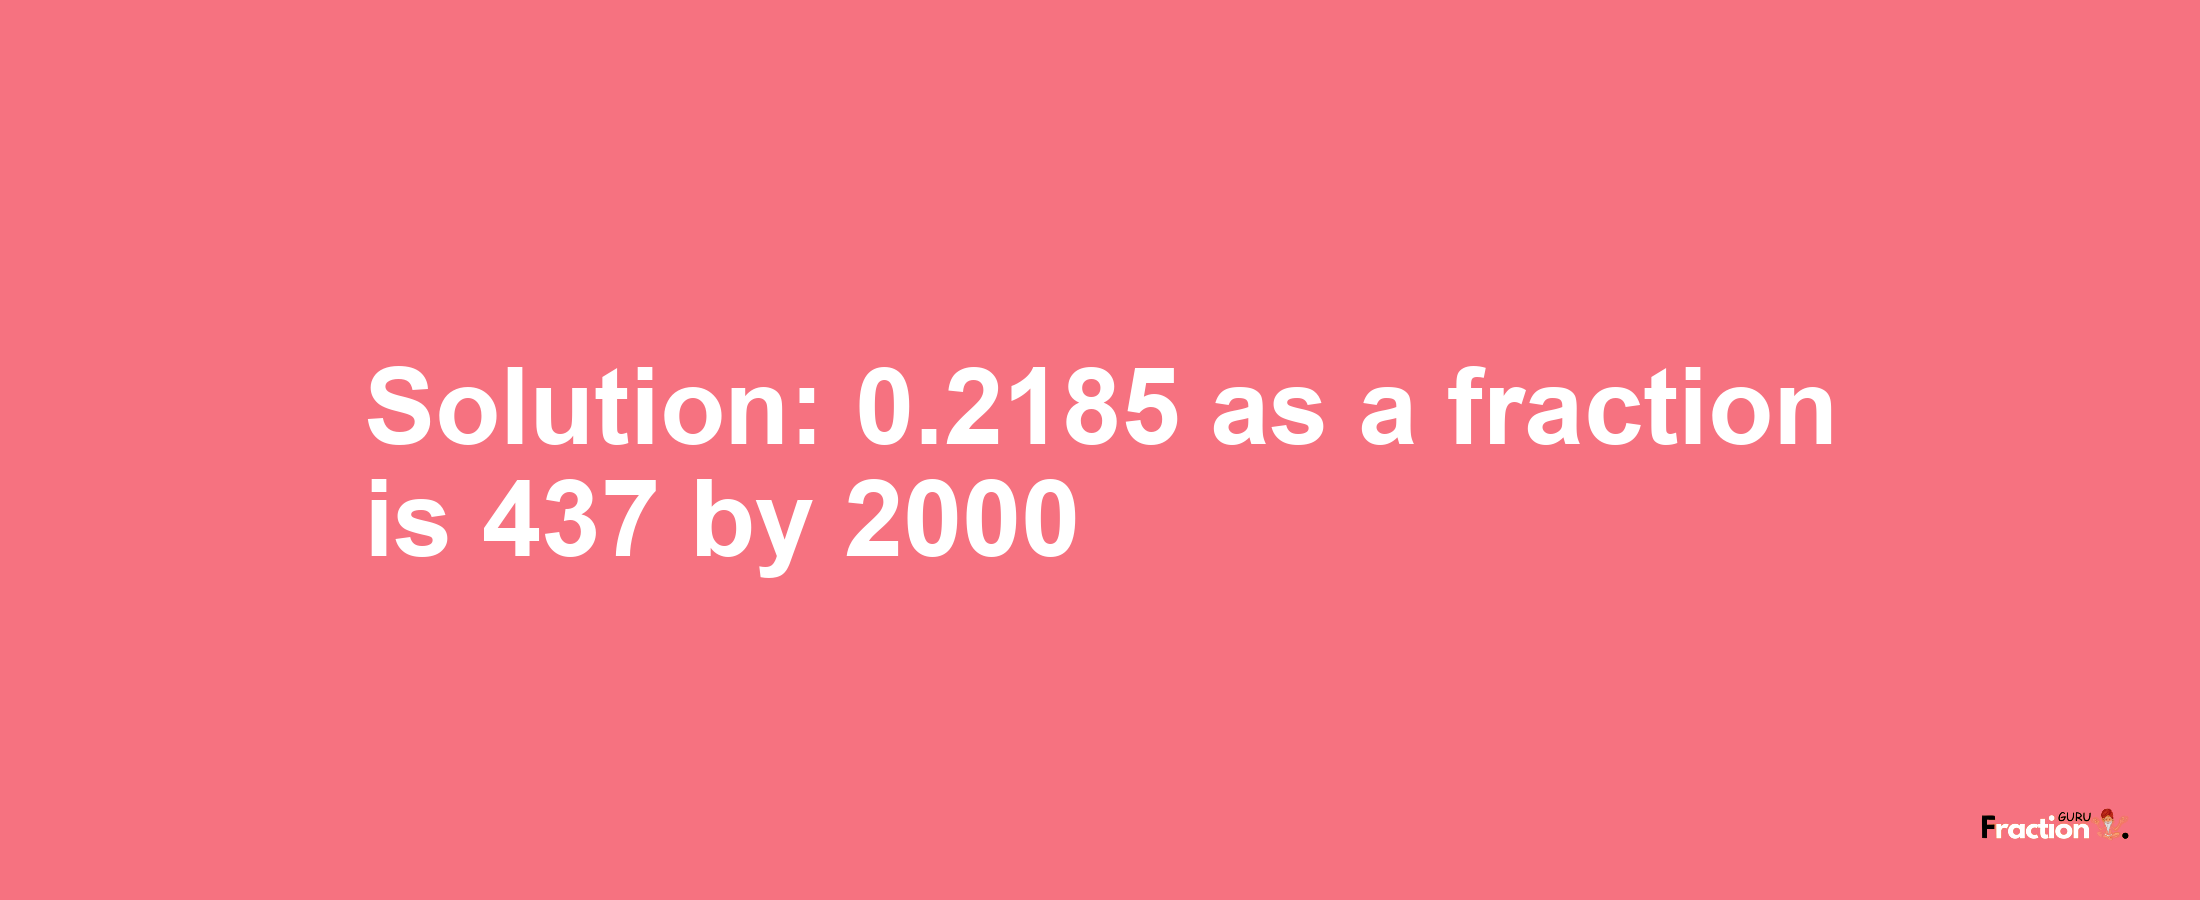 Solution:0.2185 as a fraction is 437/2000